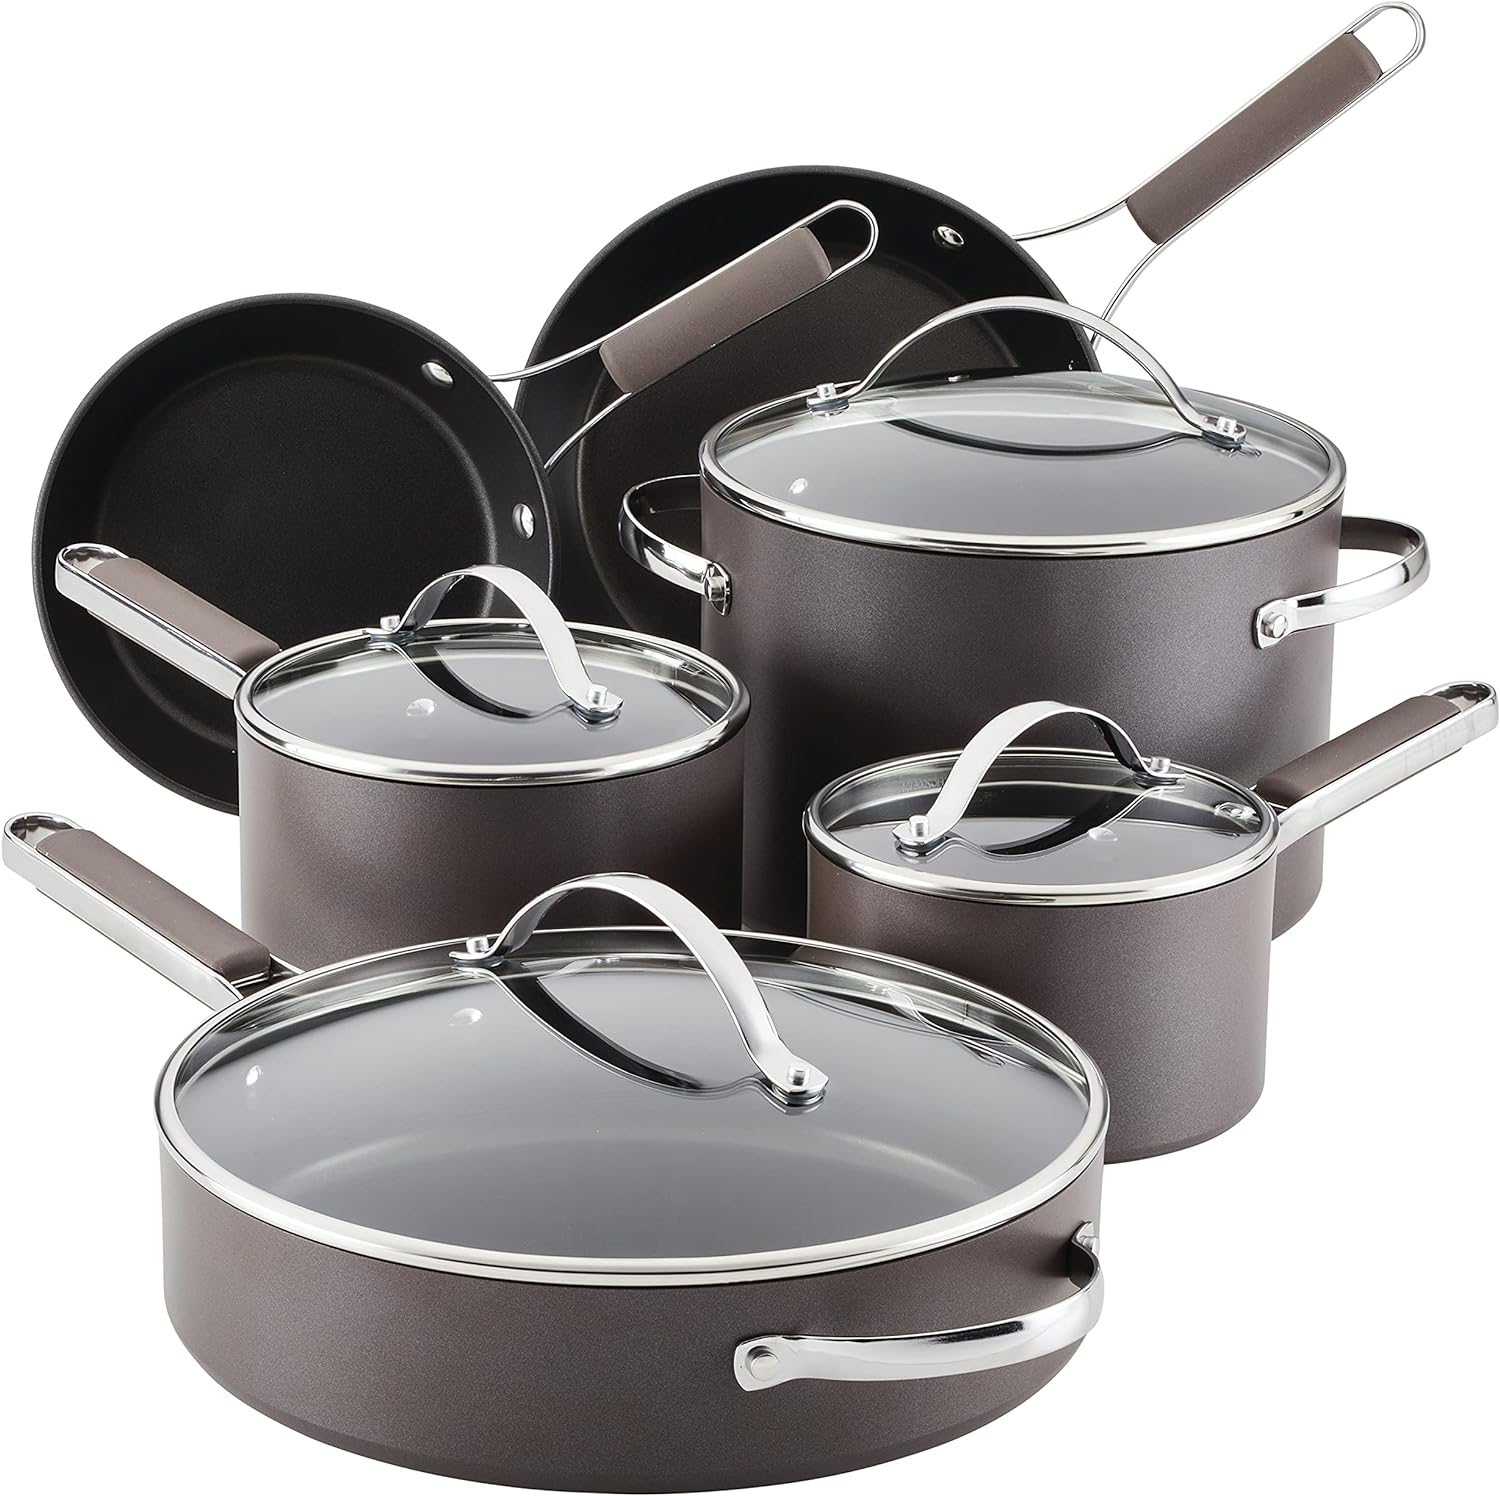 Ayesha Curry Home Collection Hard Anodized Nonstick Cookware Pots and Pans Set